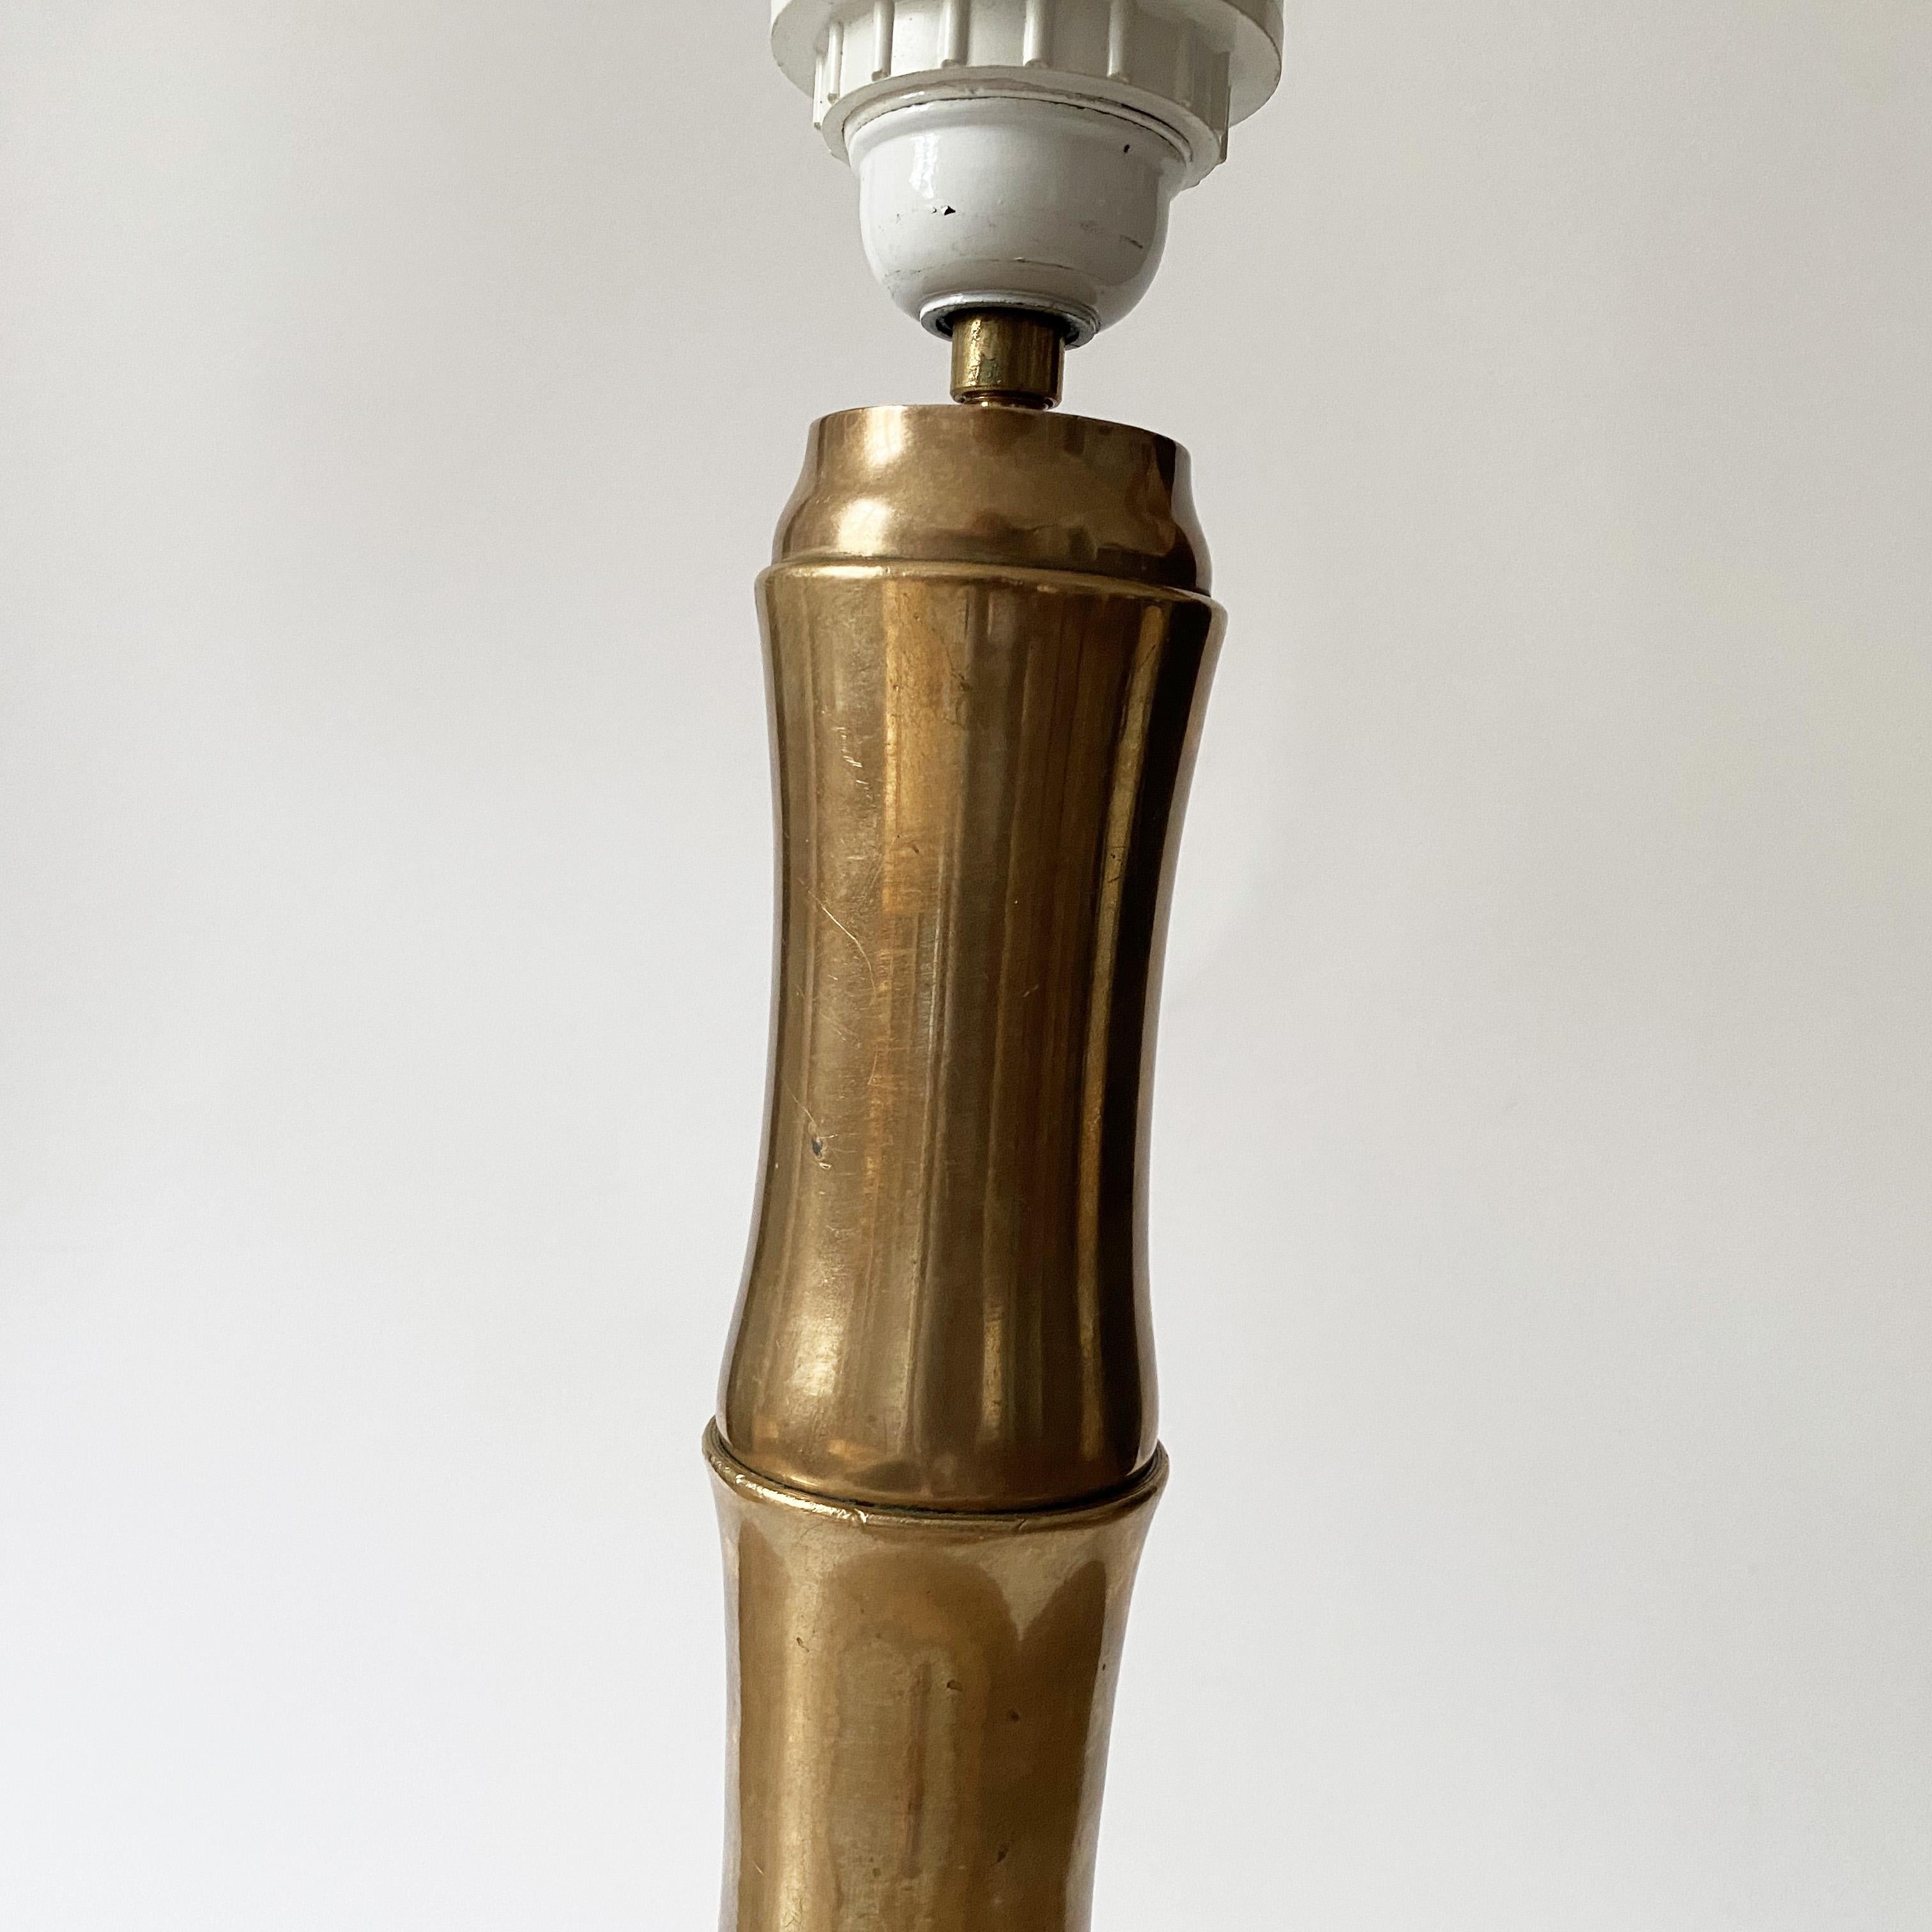 Bamboo Shaped Lamp in Brass and Travertine, in the style of Jansen, 1970s. For Sale 1